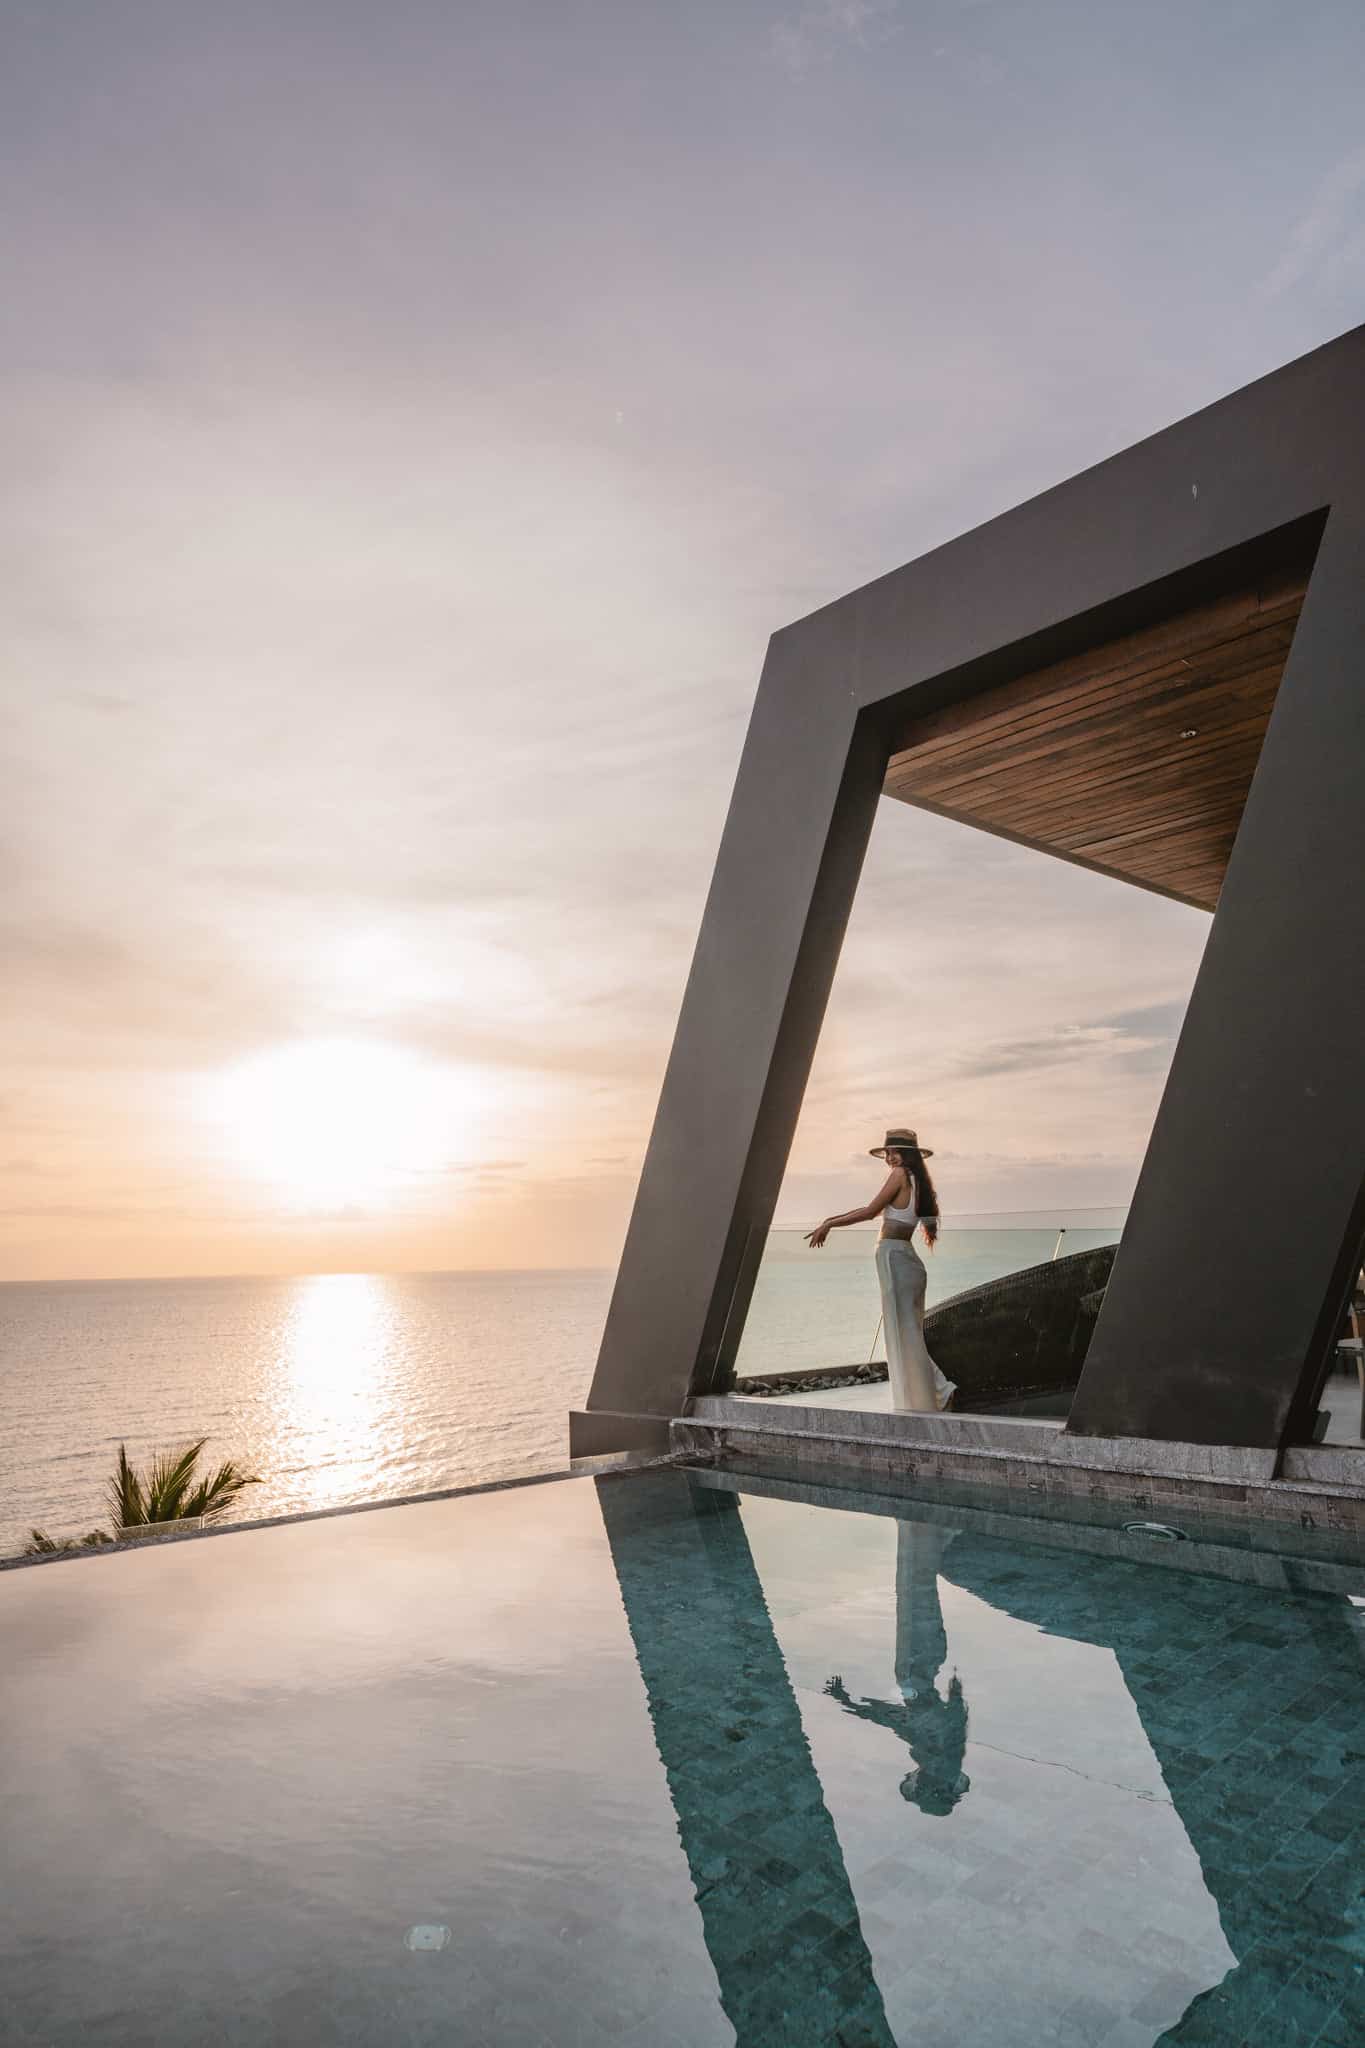 Find peace and tranquility by staying in a private pool villa.